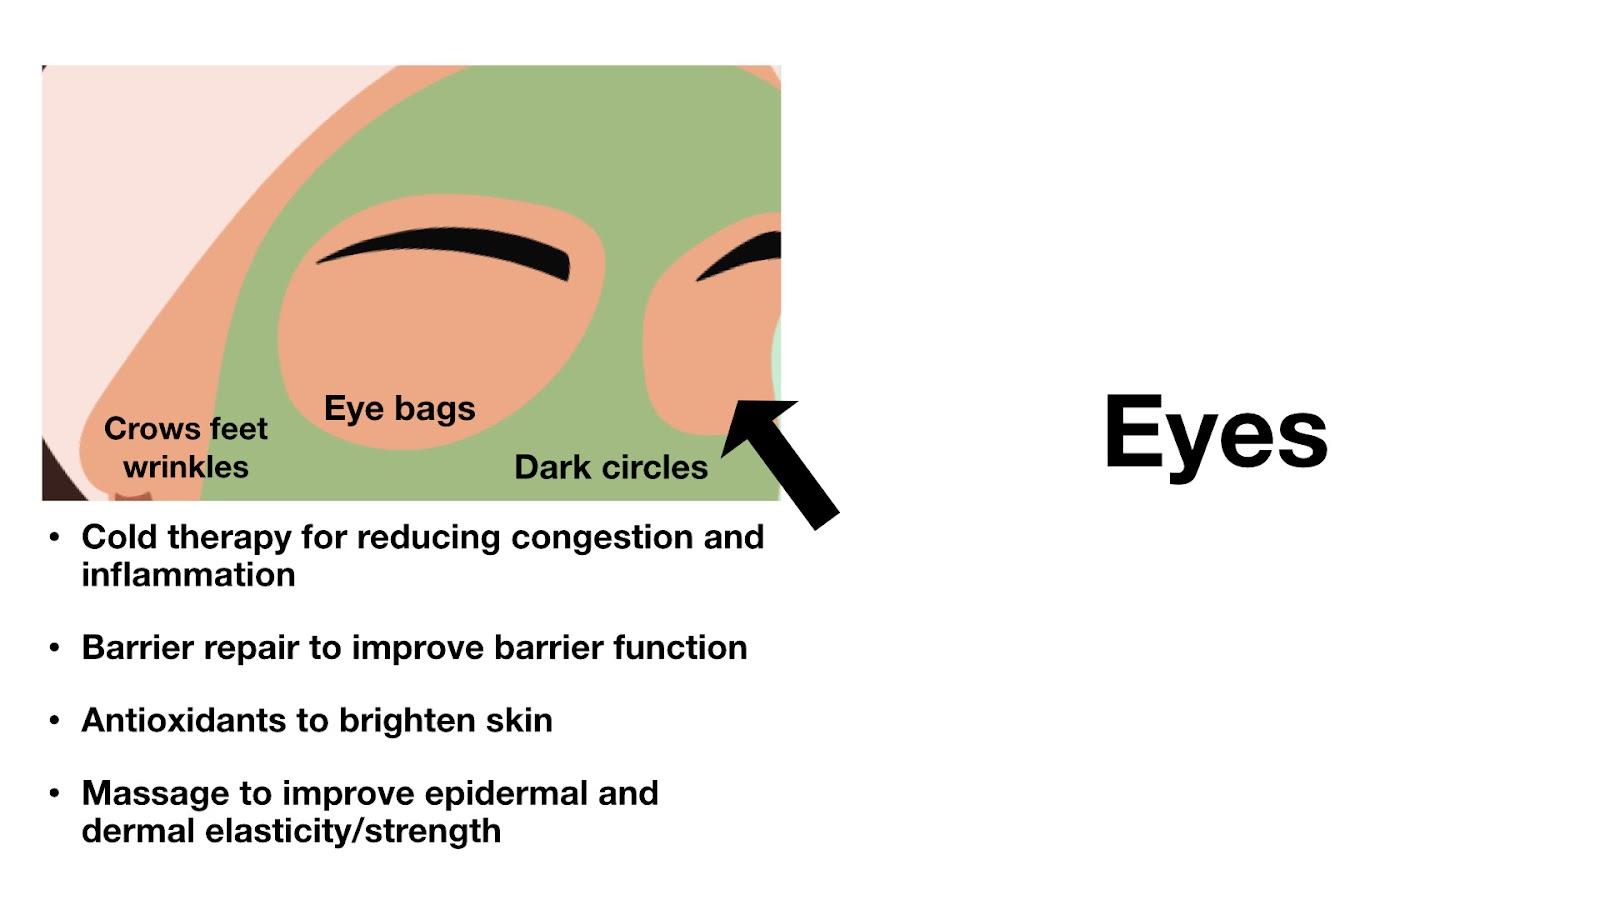 Treatment Protocol for Crows Feet Wrinkles, Eye Bags and Dark Circles